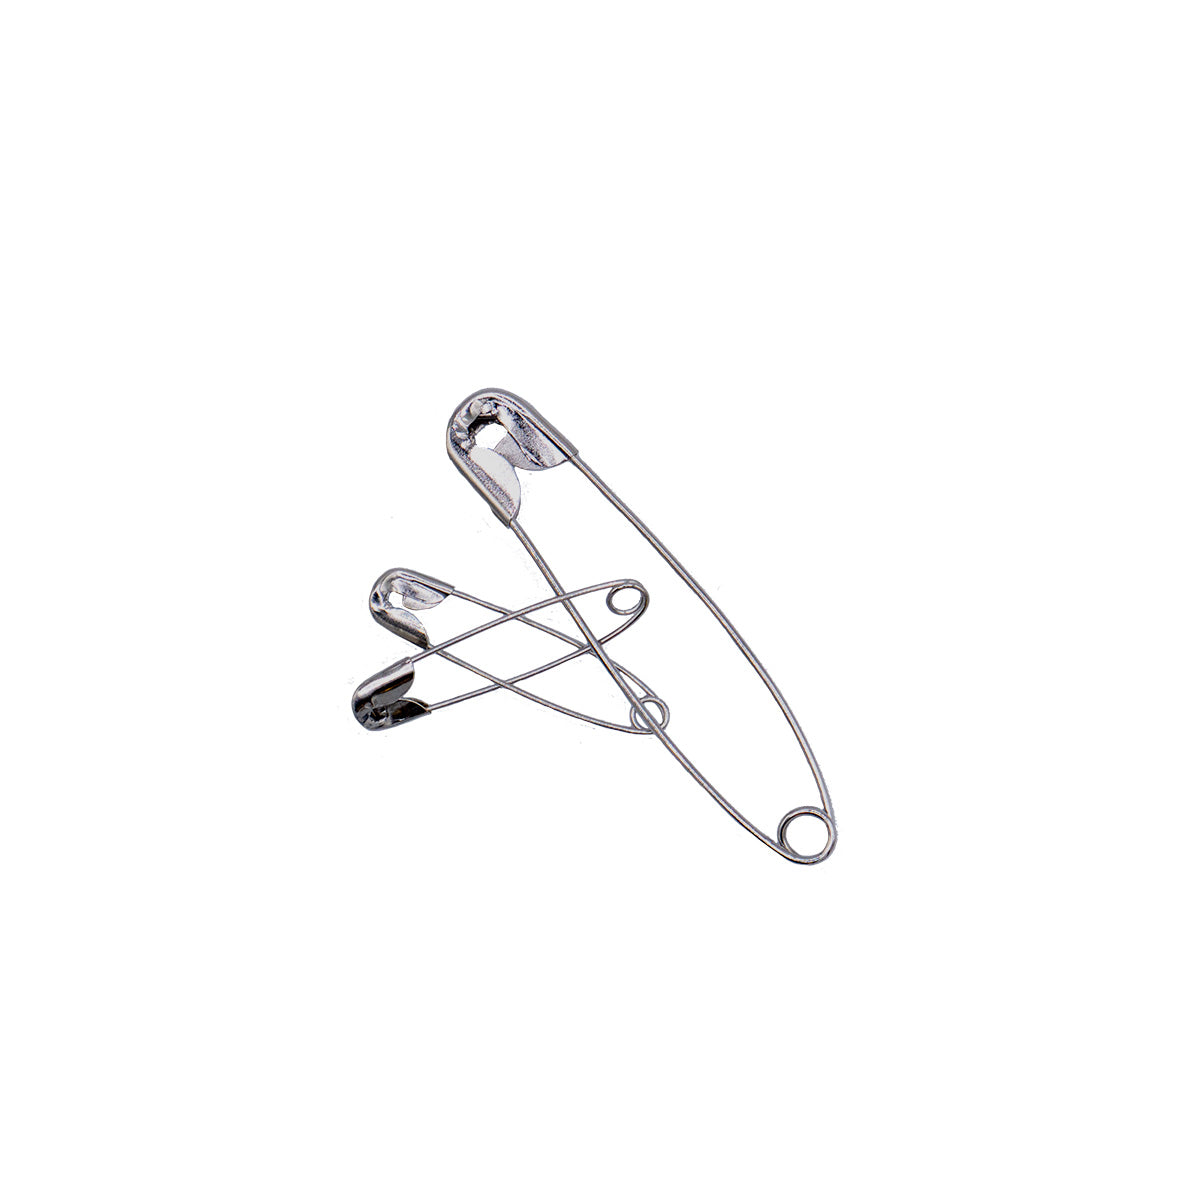 Three assorted safety pins. One is large and two are small.